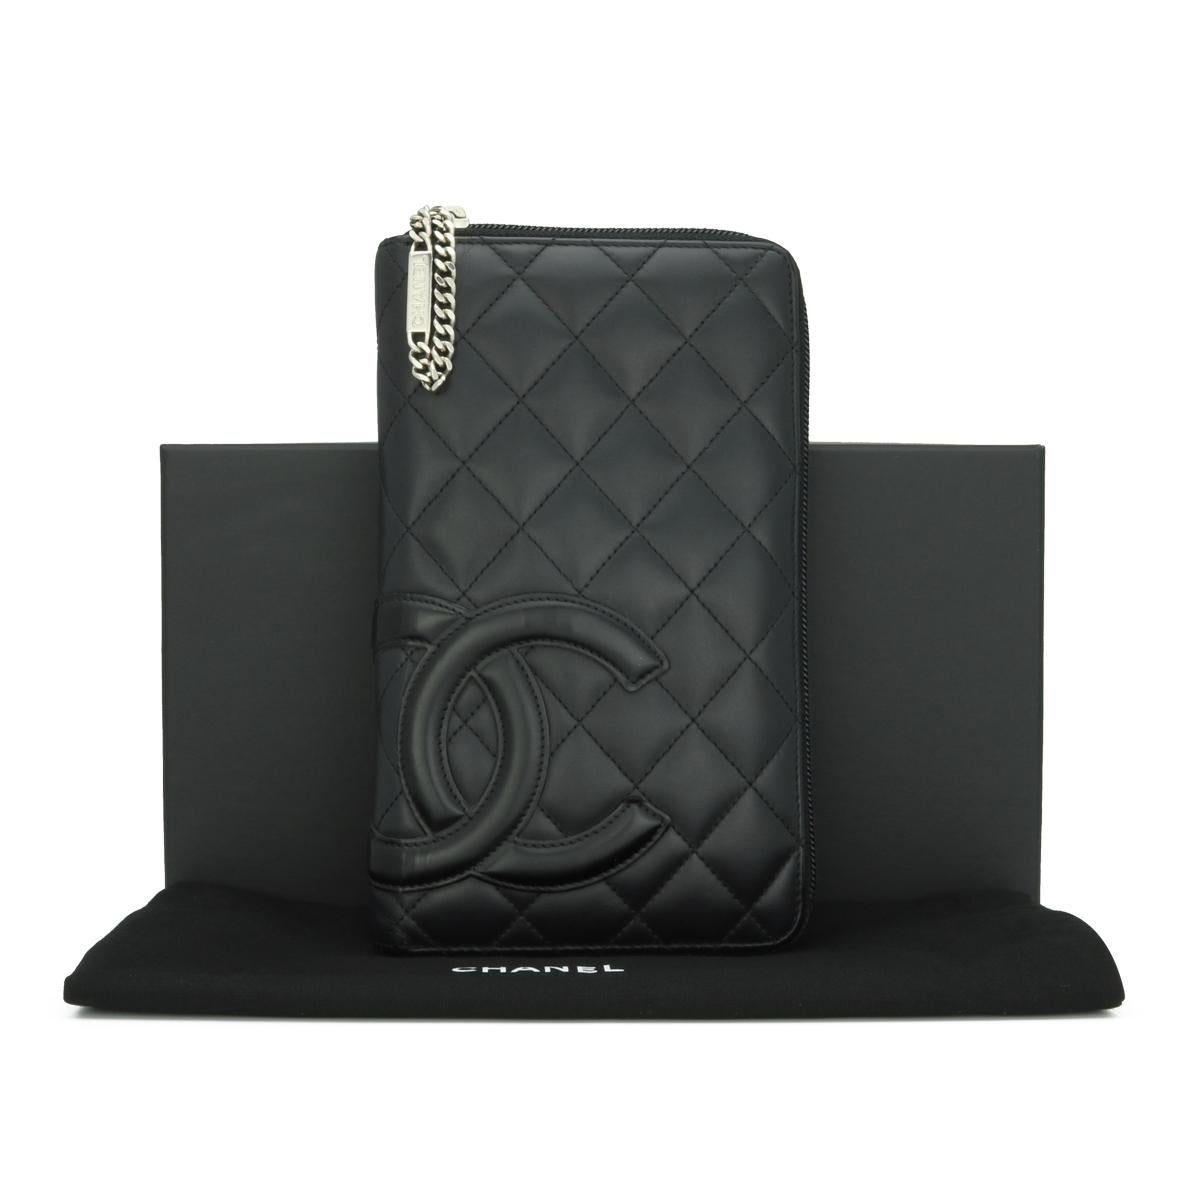 CHANEL Quilted Cambon Large Long Zipped Wallet Black Calfskin with Silver-Tone Hardware 2011.

This stunning large zipped wallet is in good condition. It still holds its original shape, and the hardware is still very shiny. It is such a gorgeous,